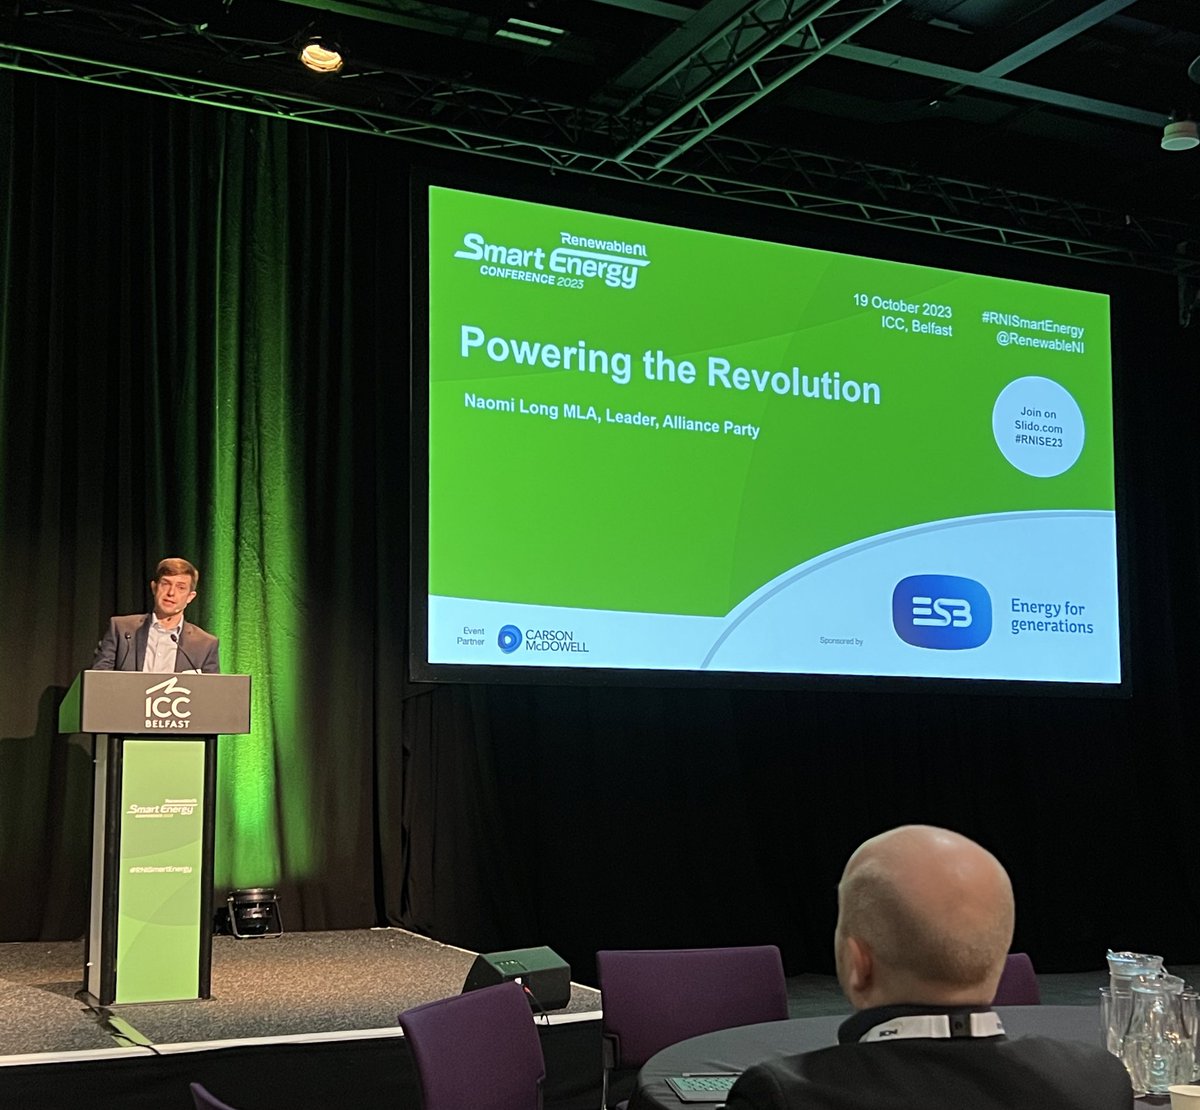 We’re at @RenewableNI’s Smart Energy Conference 2023 today in the ICC, Belfast. A big turnout of industry professionals and stakeholders with an interest in 80% by 2030 and #NetZero. We’re looking forward to hearing from all the speakers and guests throughout the day. #RNISE23